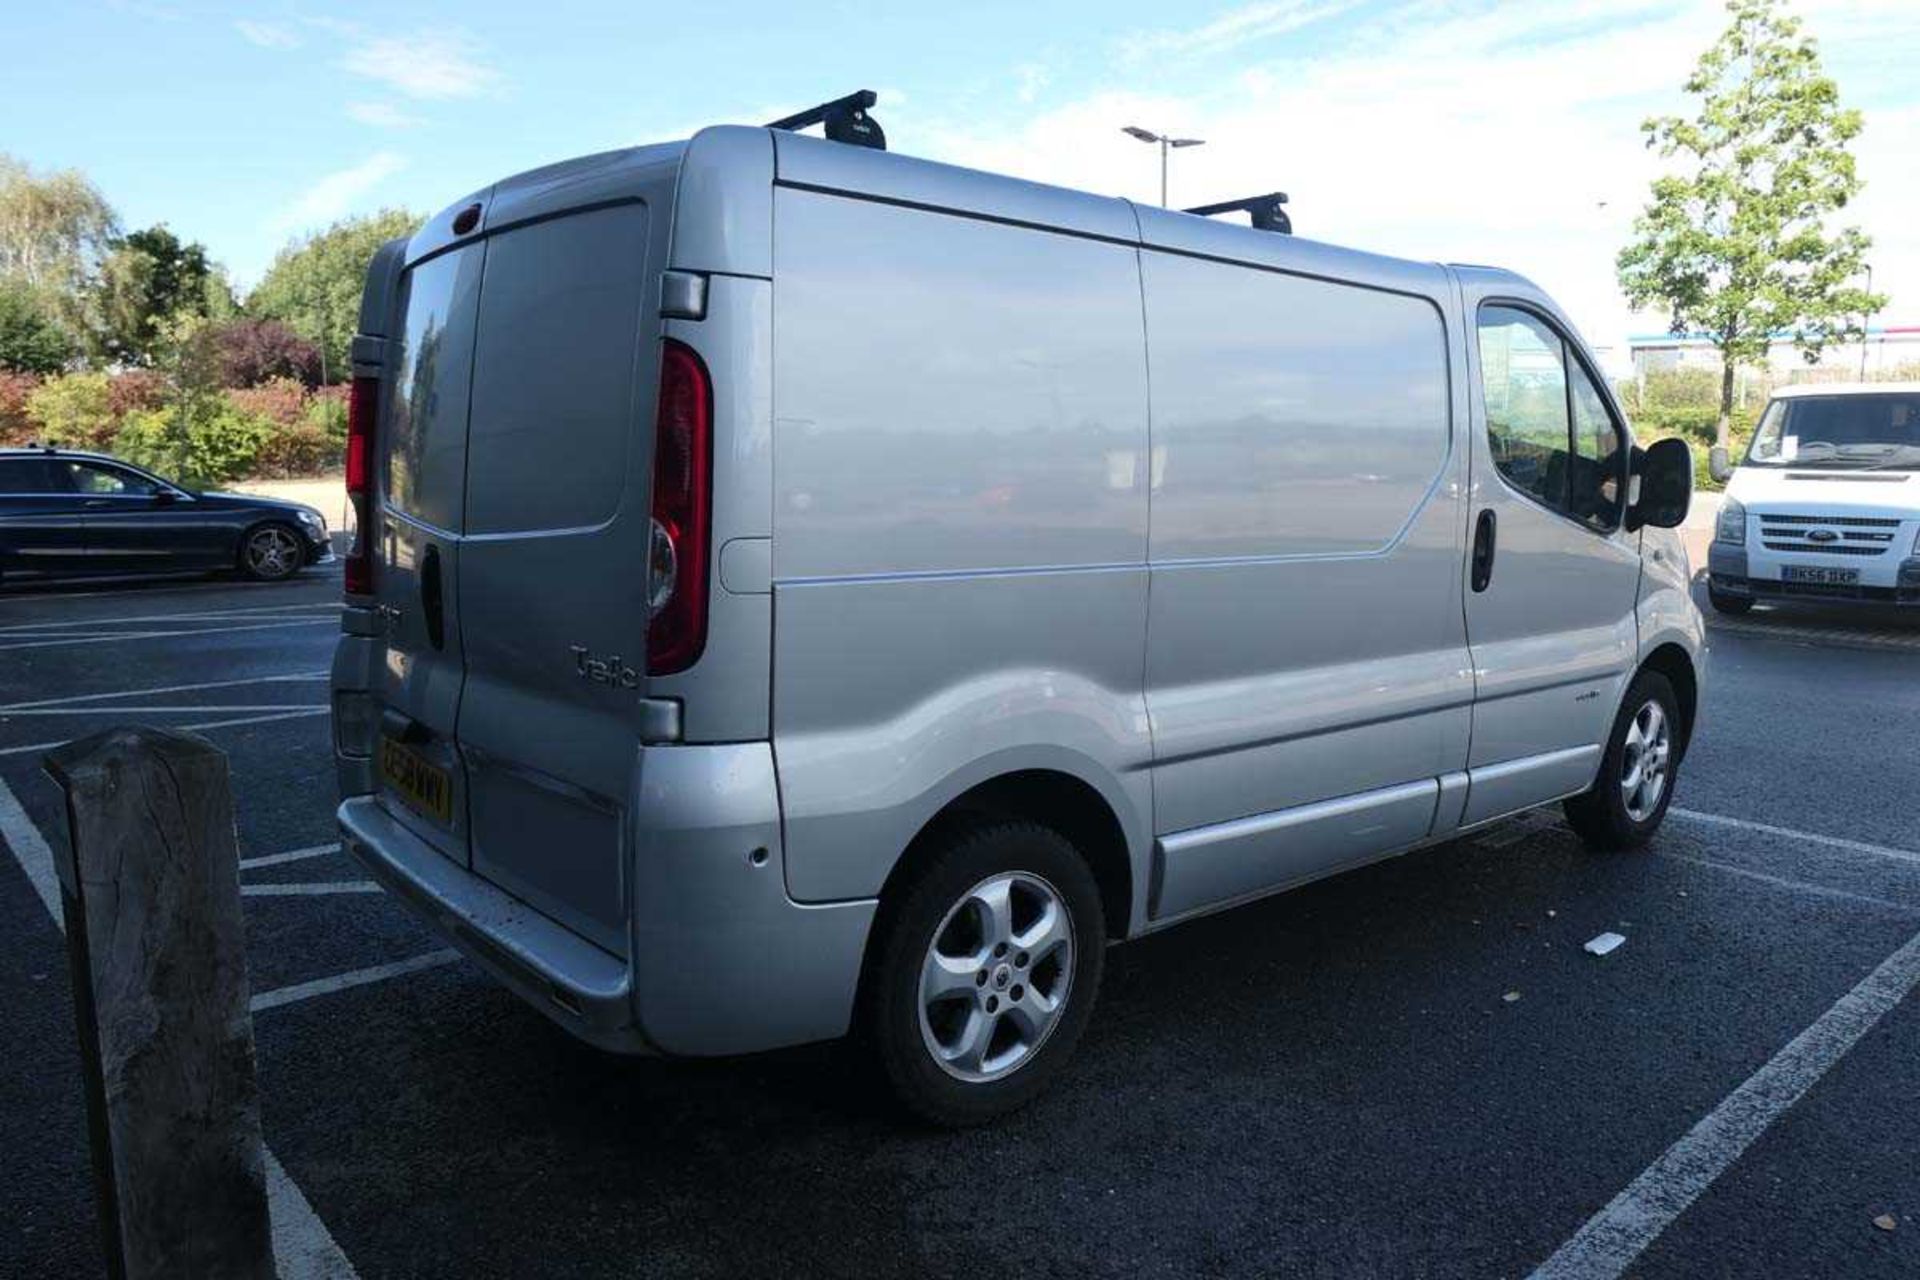 (CE58 WWV) Renault Trafic SL27 Sport DCI 115 panel van in silver, first registered 27/09/2008, - Image 7 of 12